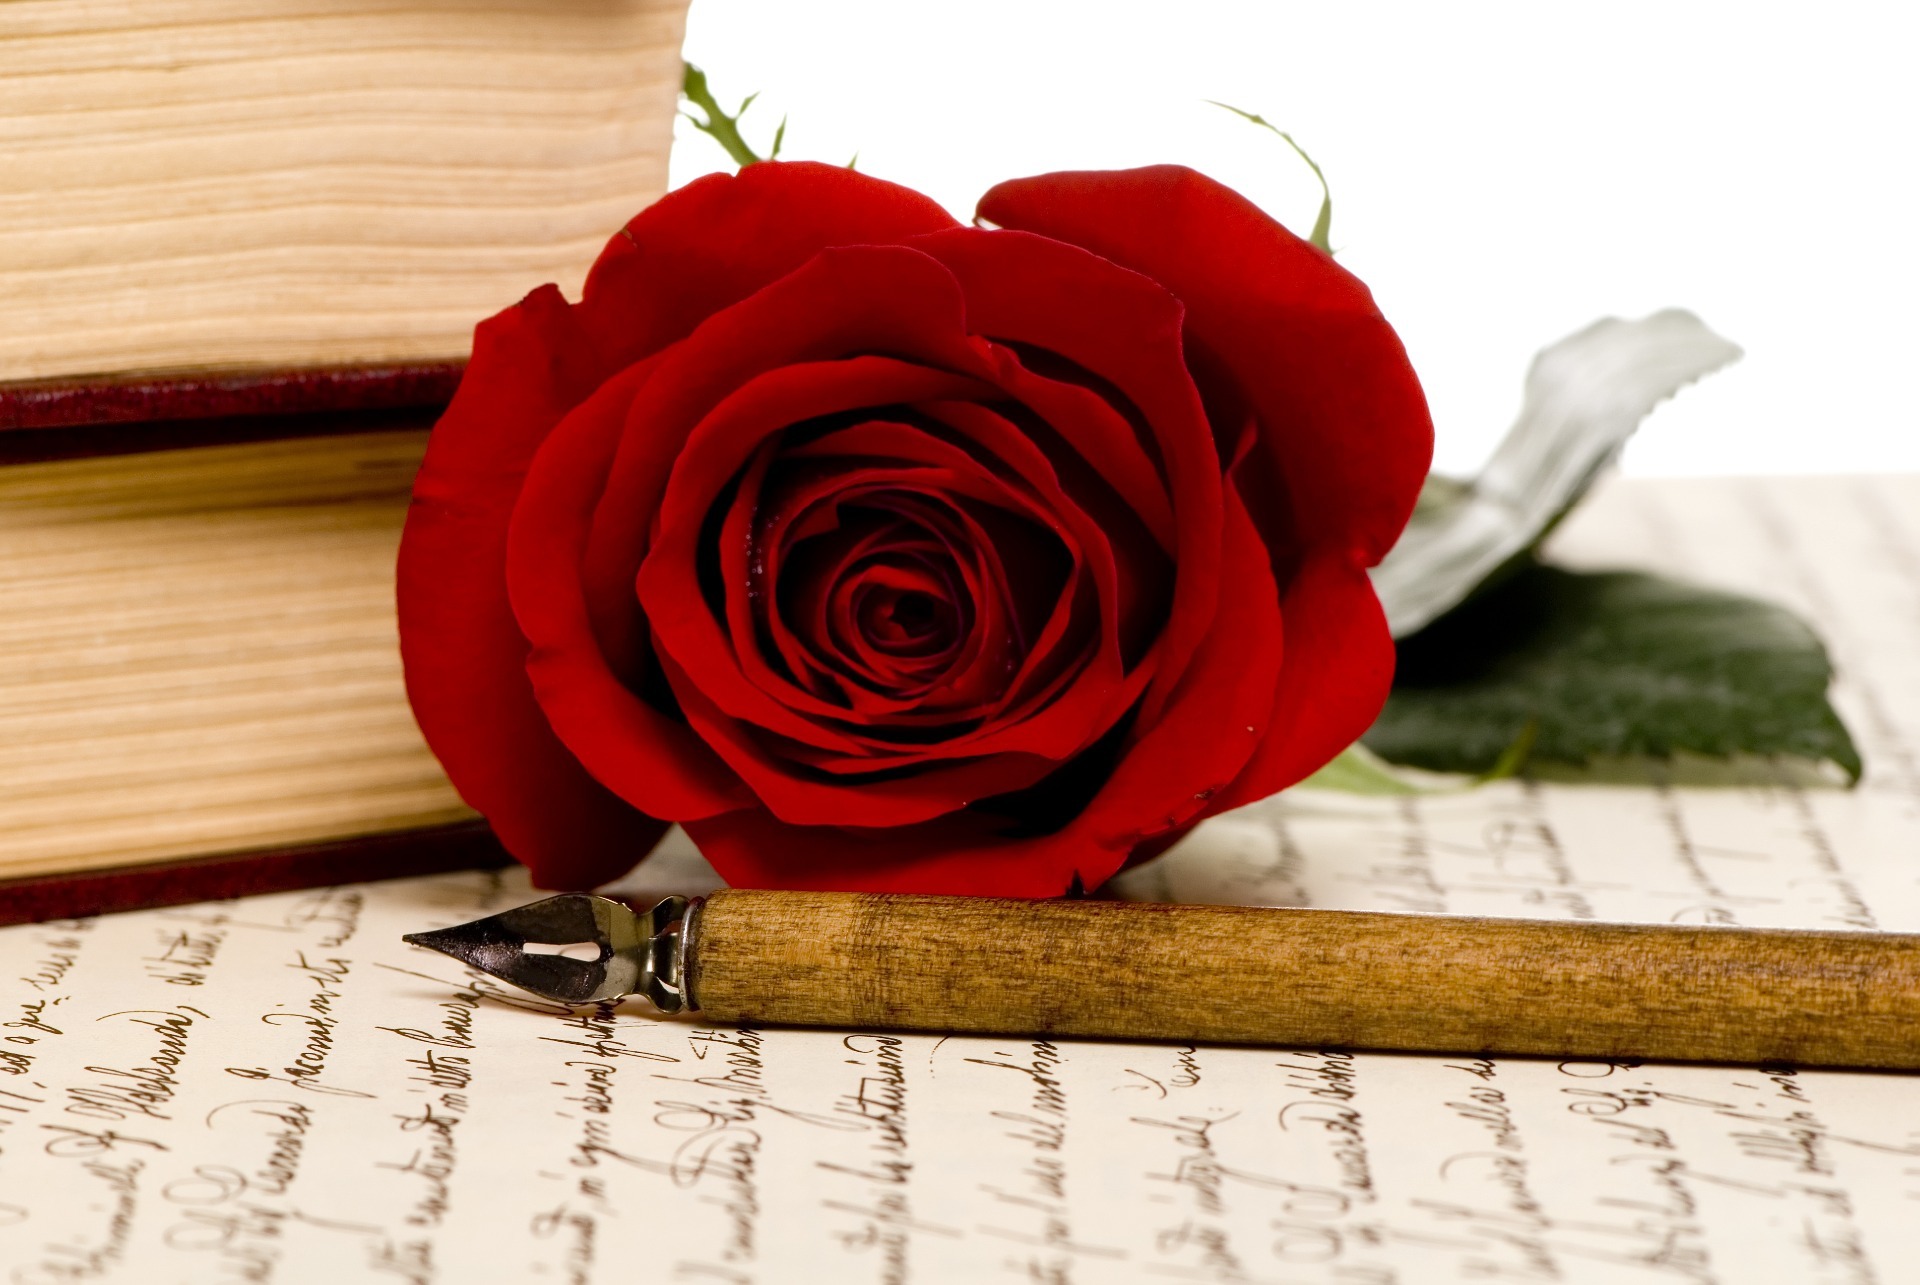 A red rose, resting next to two books, on top of a Will with a pen